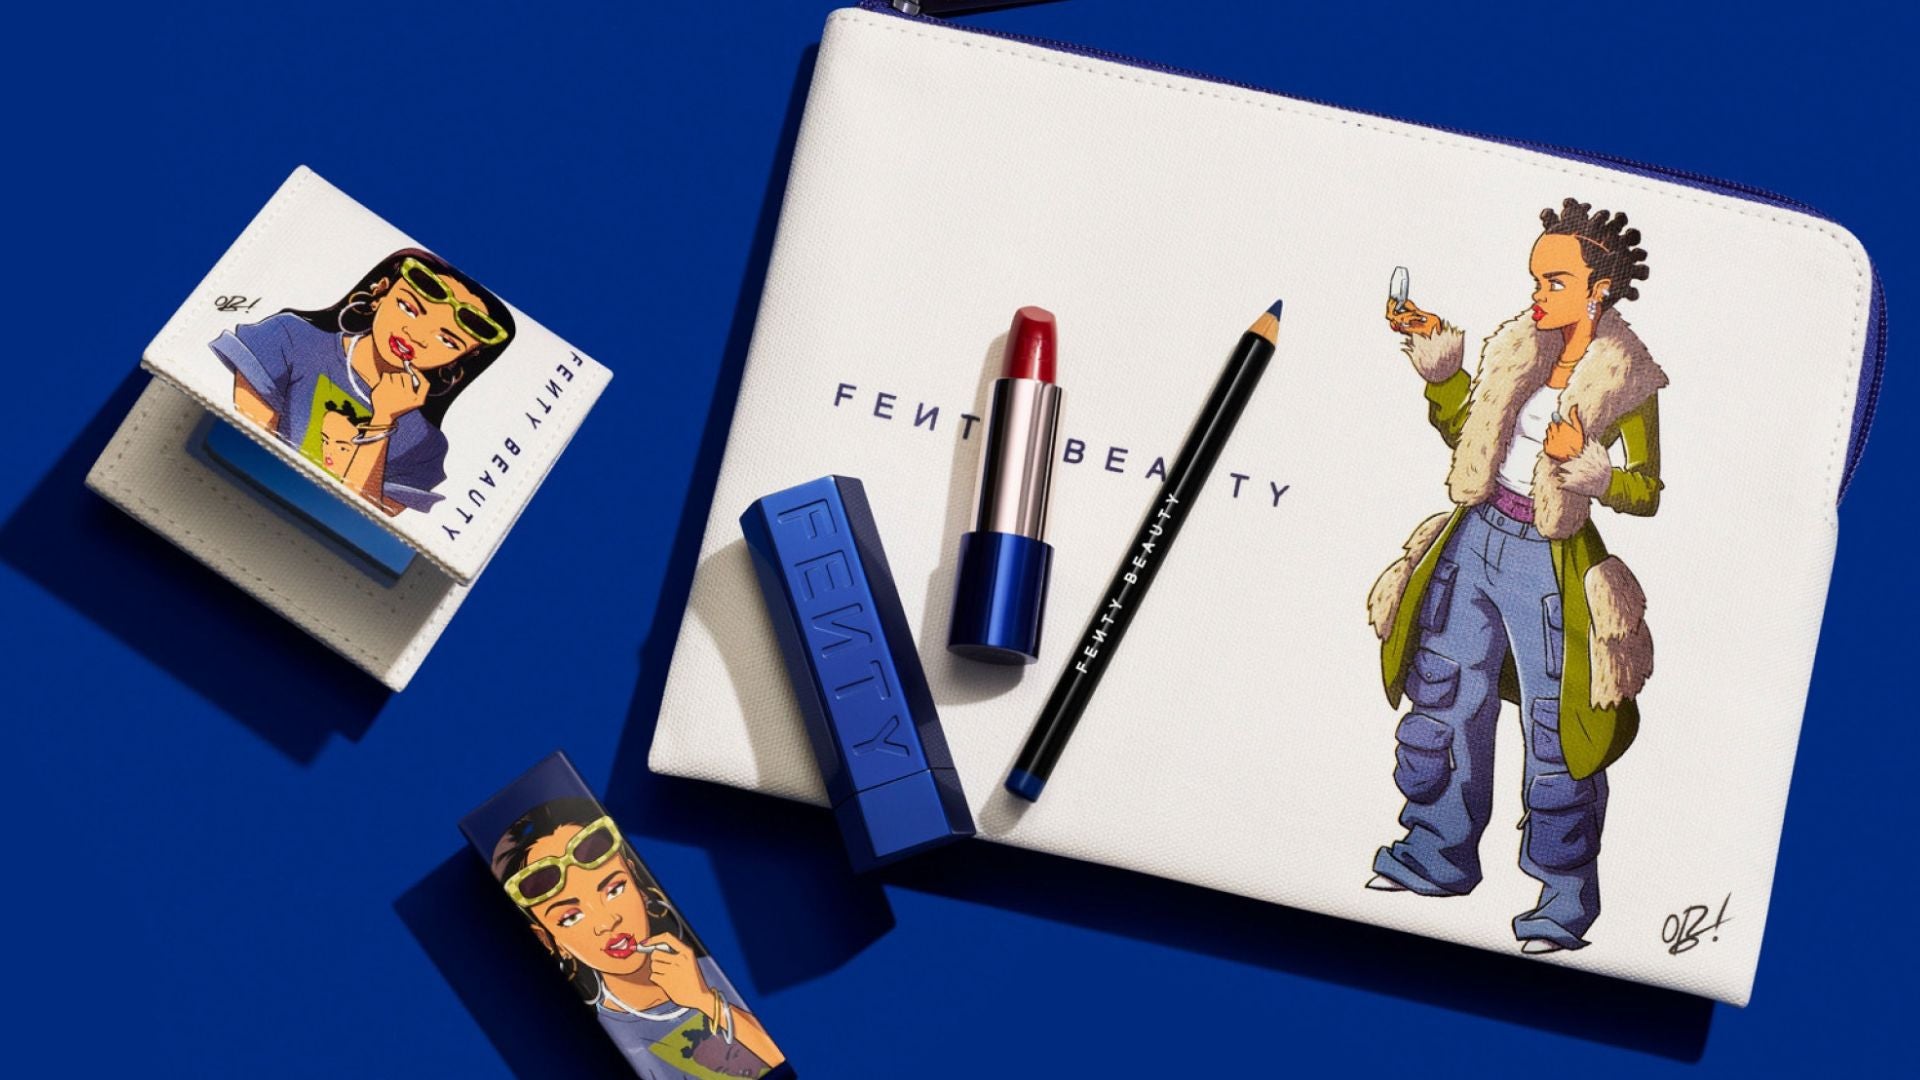 review, photos, ingredients, trends, makeup, 2022, 2023, fenty beauty, rihanna, the navy collection, the mvp, semi-matte refillable lipstick, the case, wish you wood longwear pencil eyeliner, makeup bag, makeup mirror